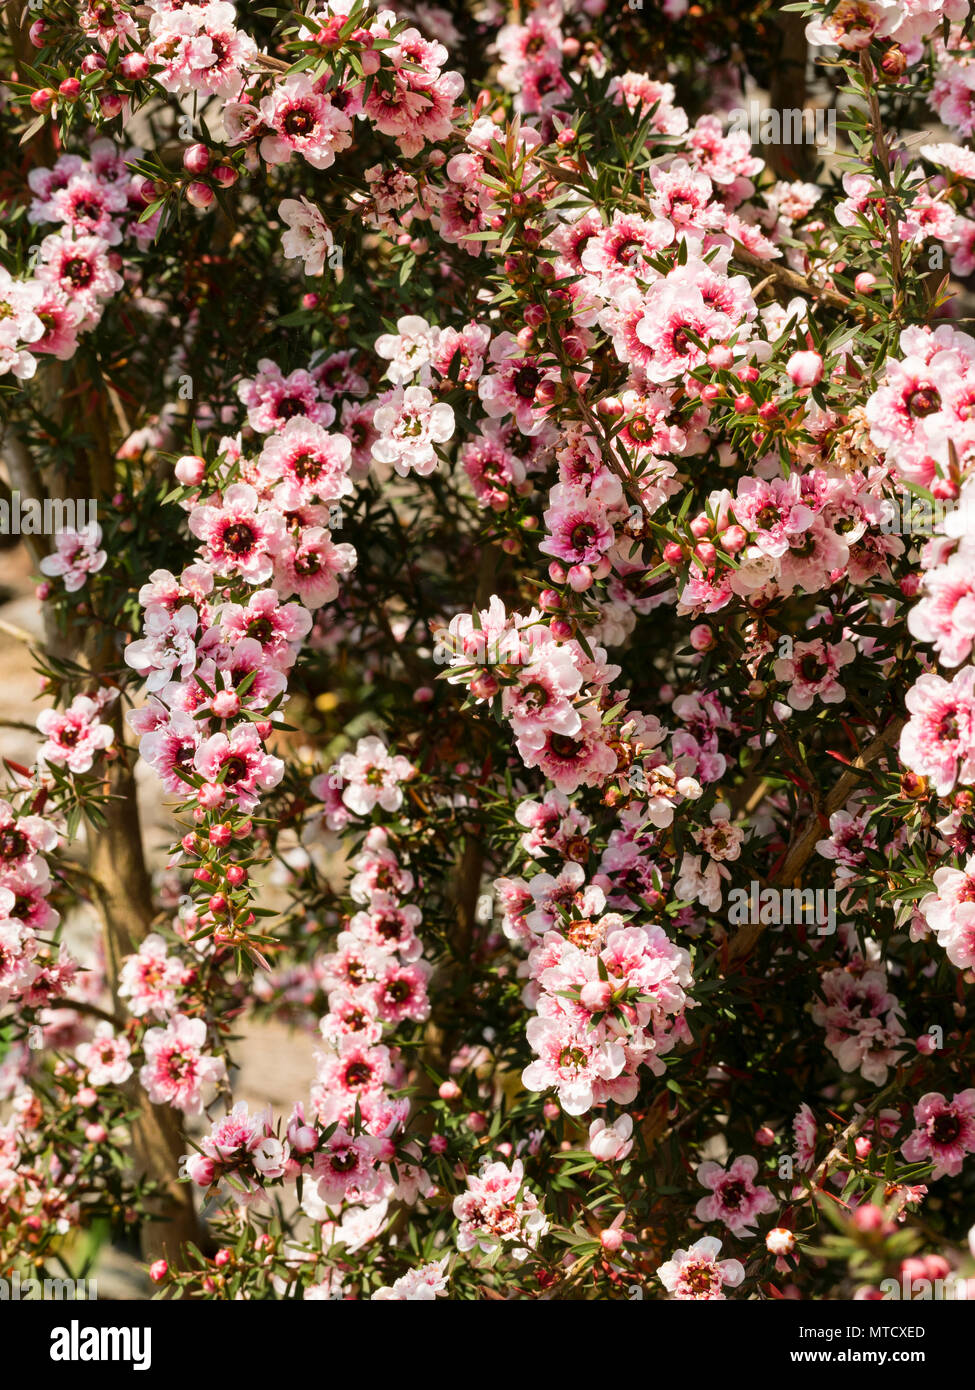 Double pink form of the New Zealand Manuka or tea tree, Leptospermum scoparium, flowering in early summer Stock Photo